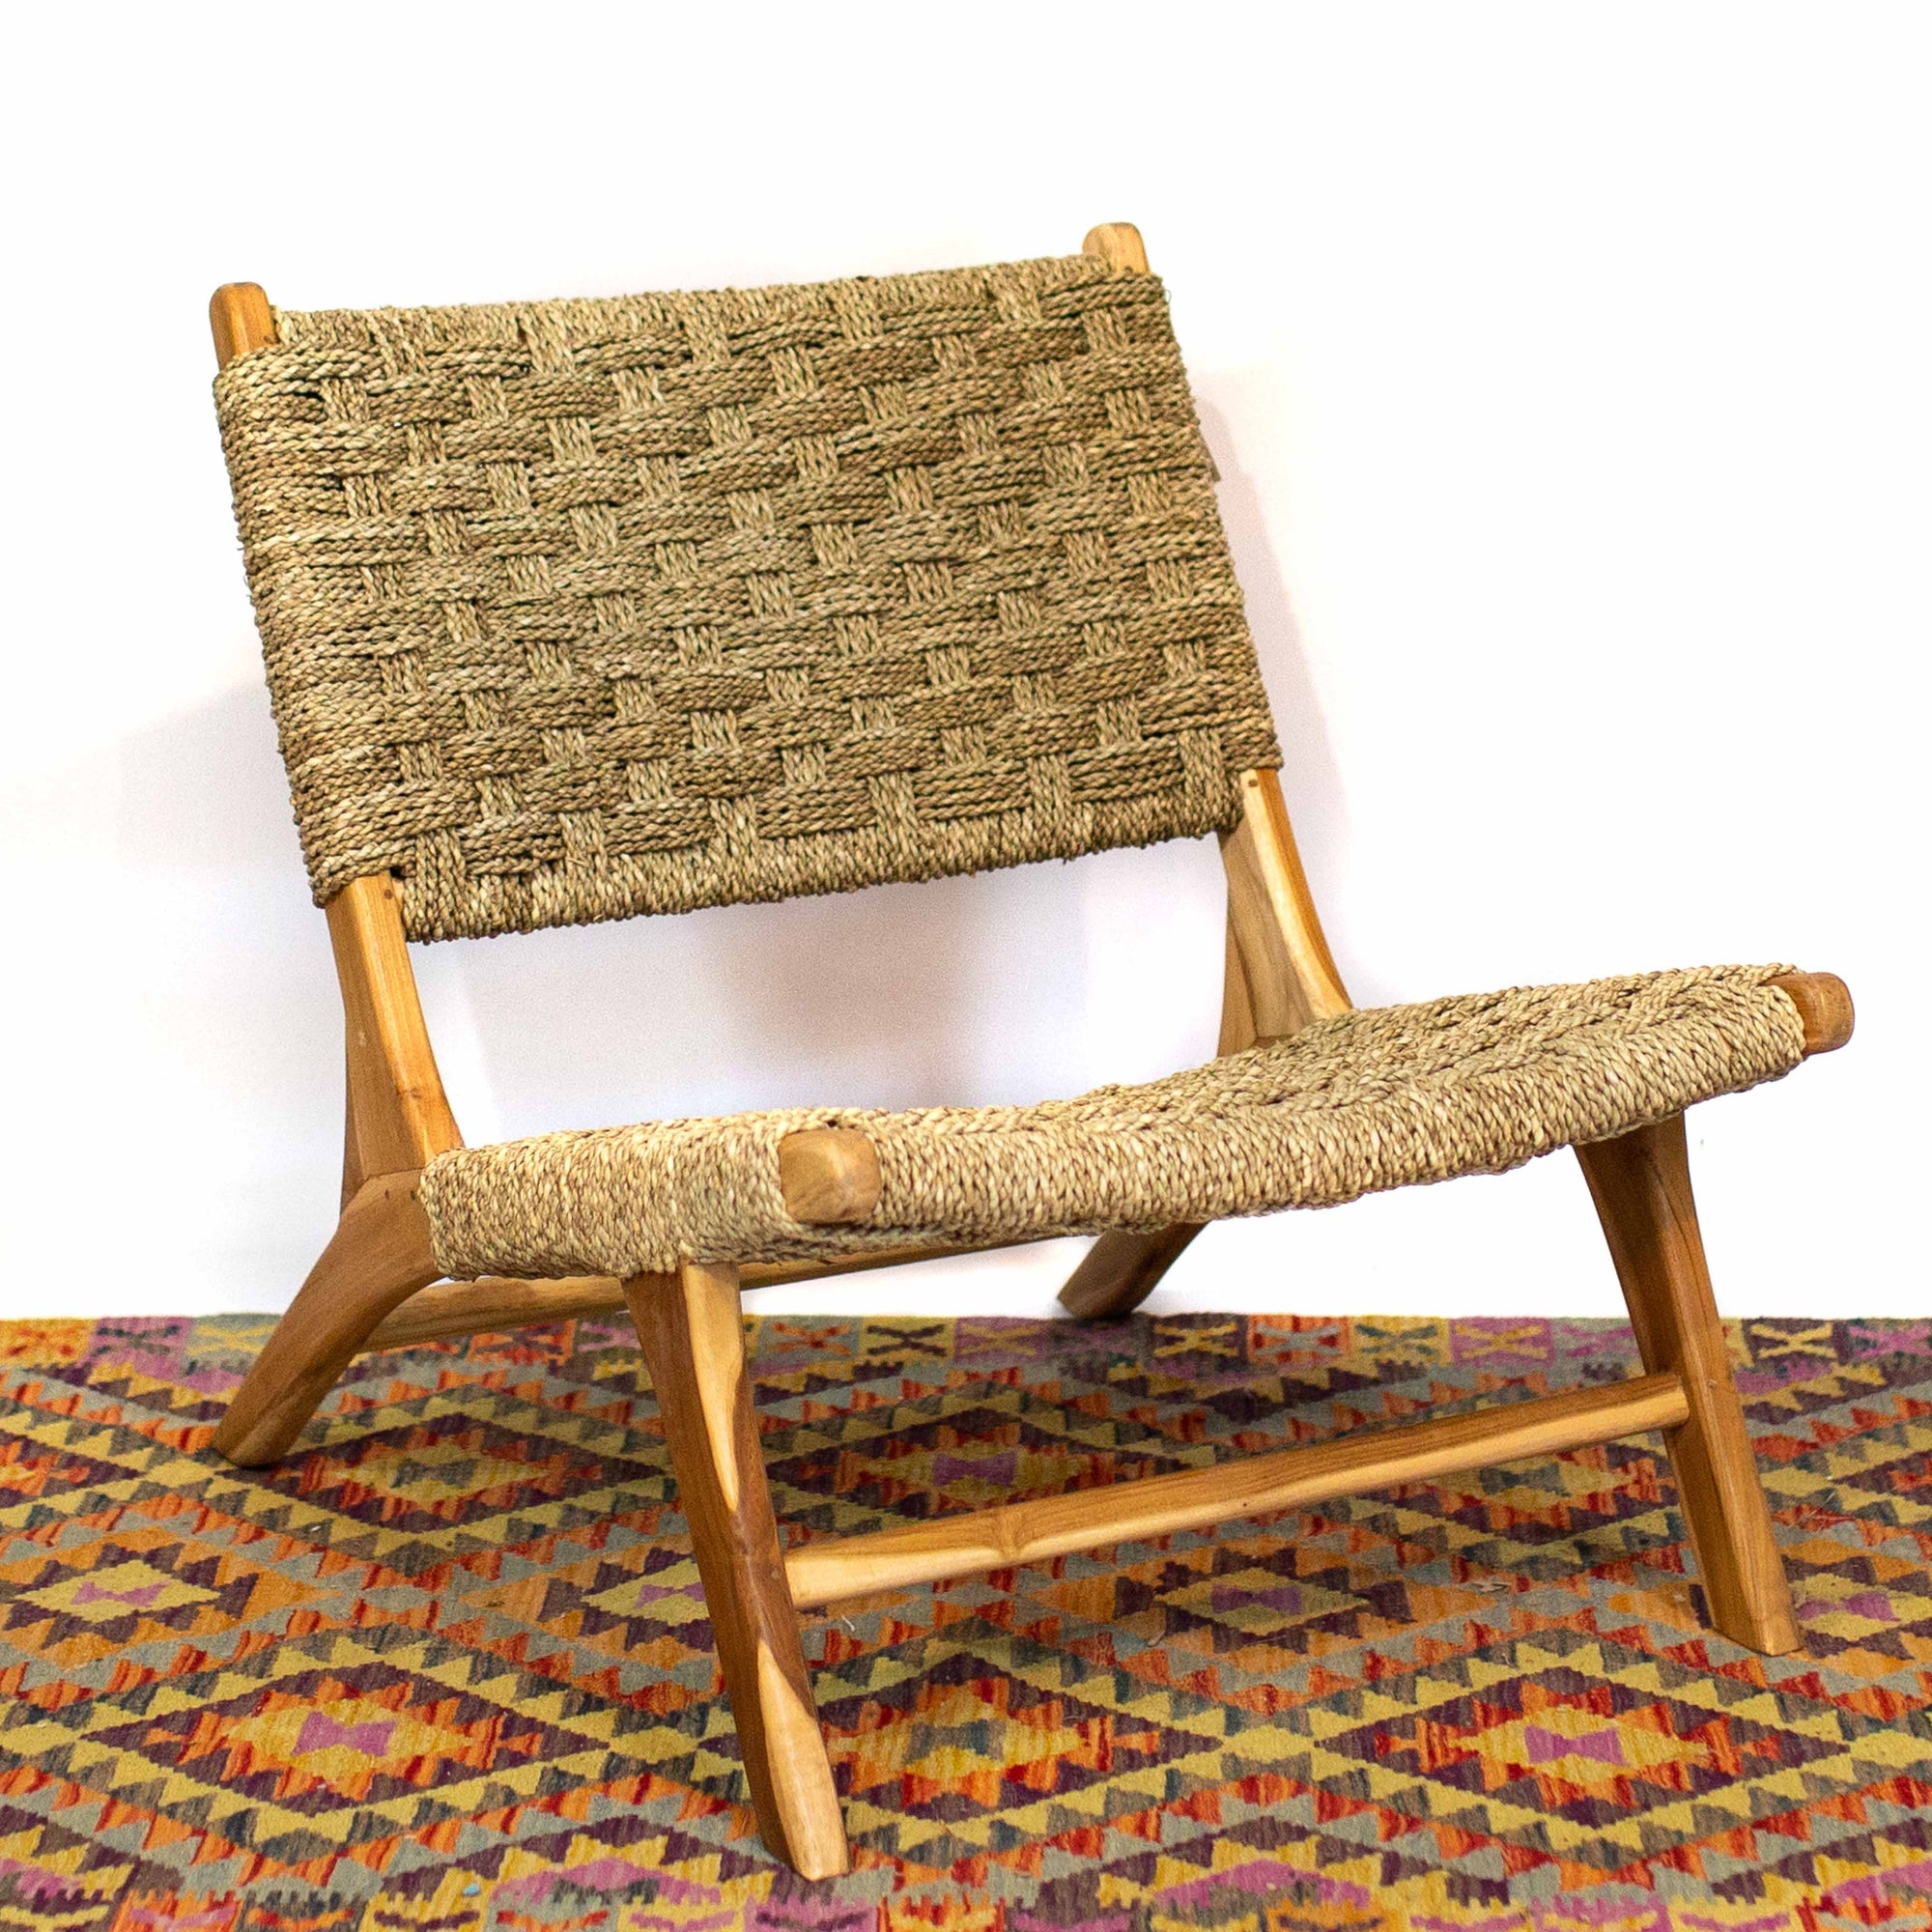 Photo of Seagrass Woven Lounge Chair - Natural